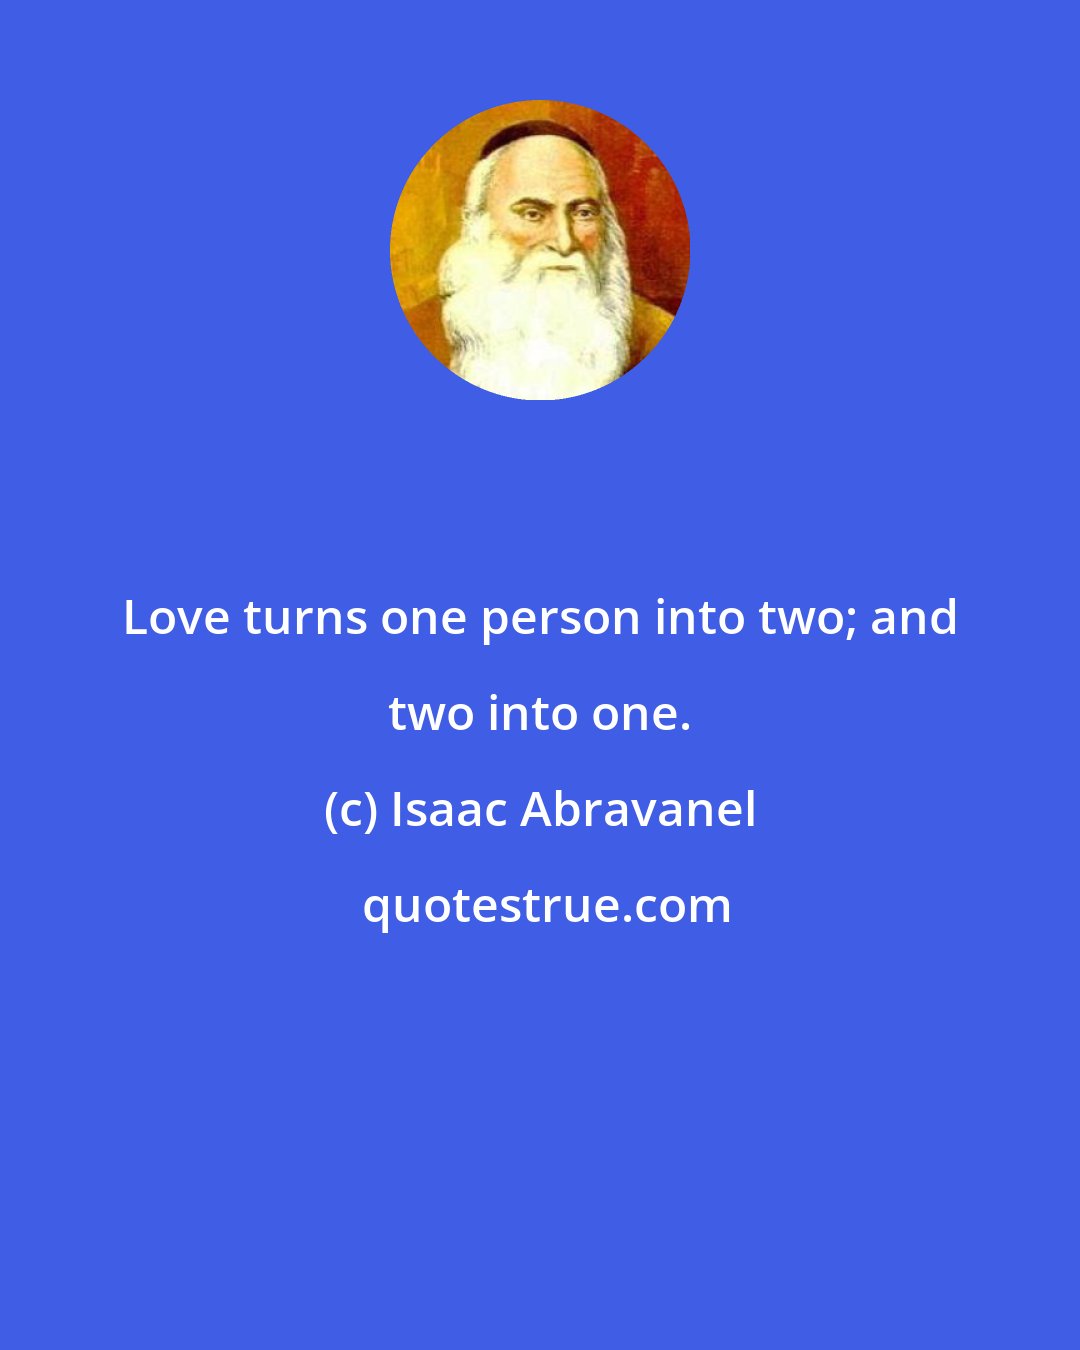 Isaac Abravanel: Love turns one person into two; and two into one.